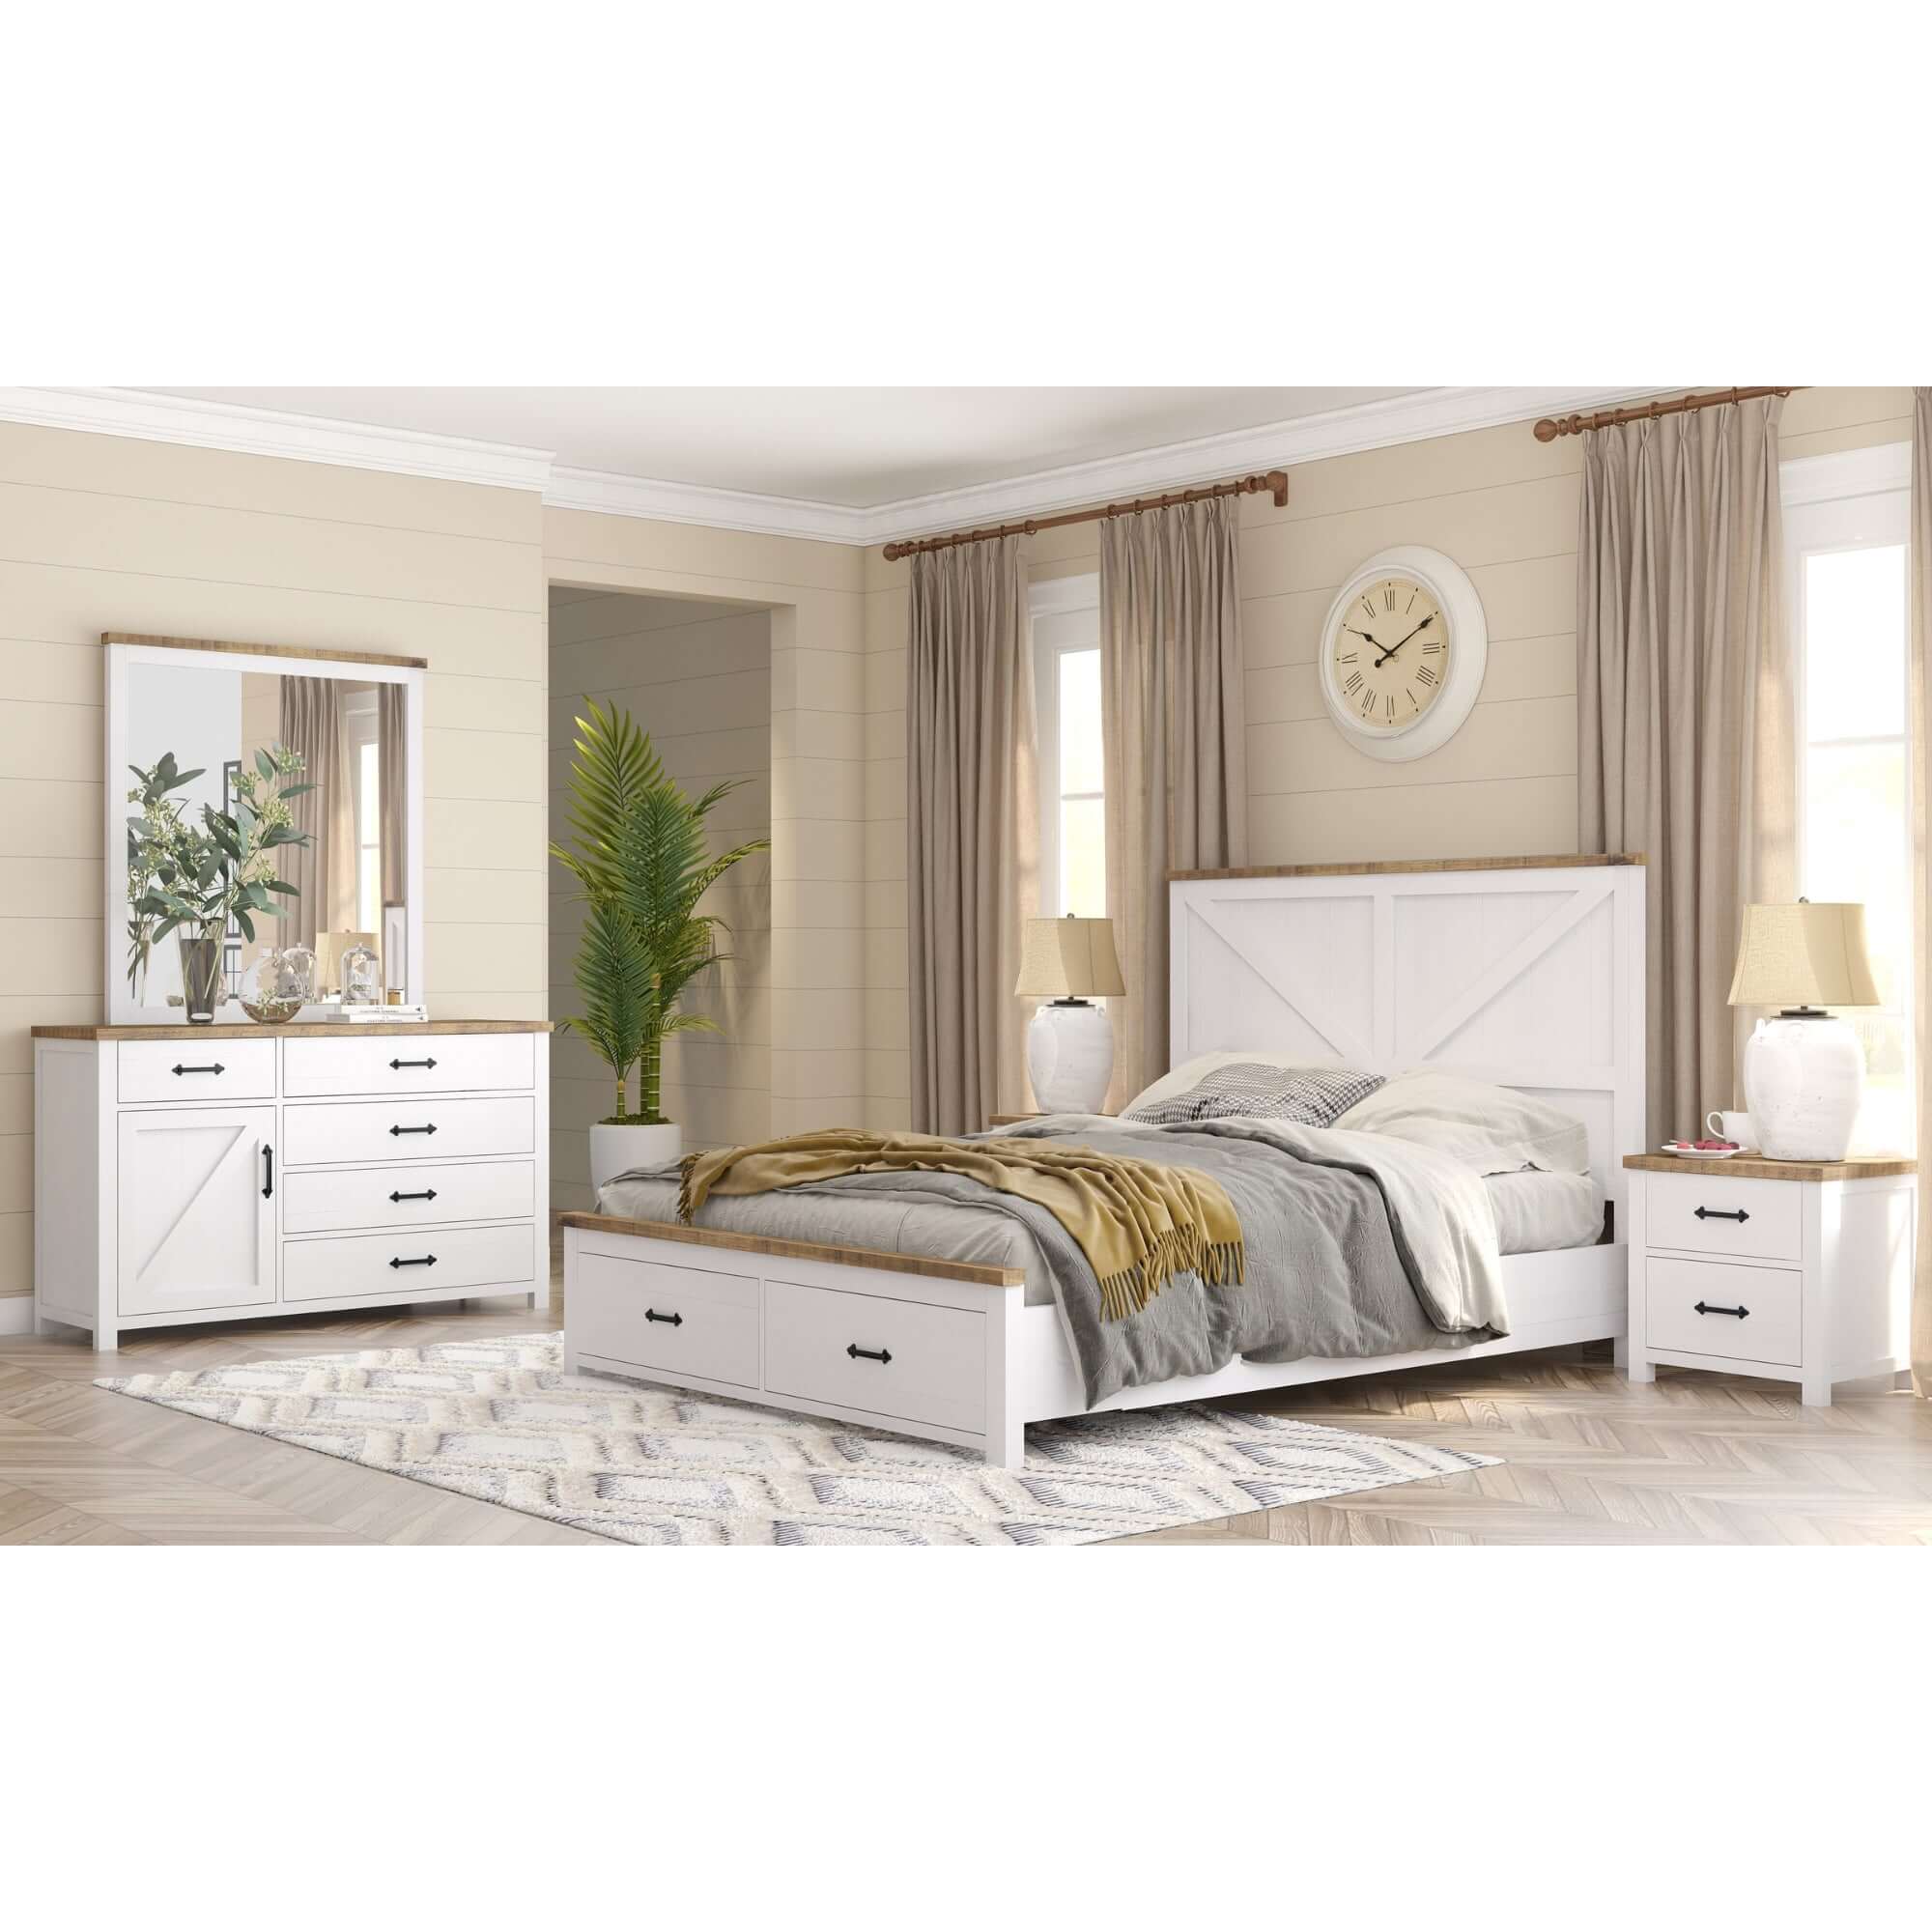 Grandy King Bed Frame with Storage Drawers-Upinteriors